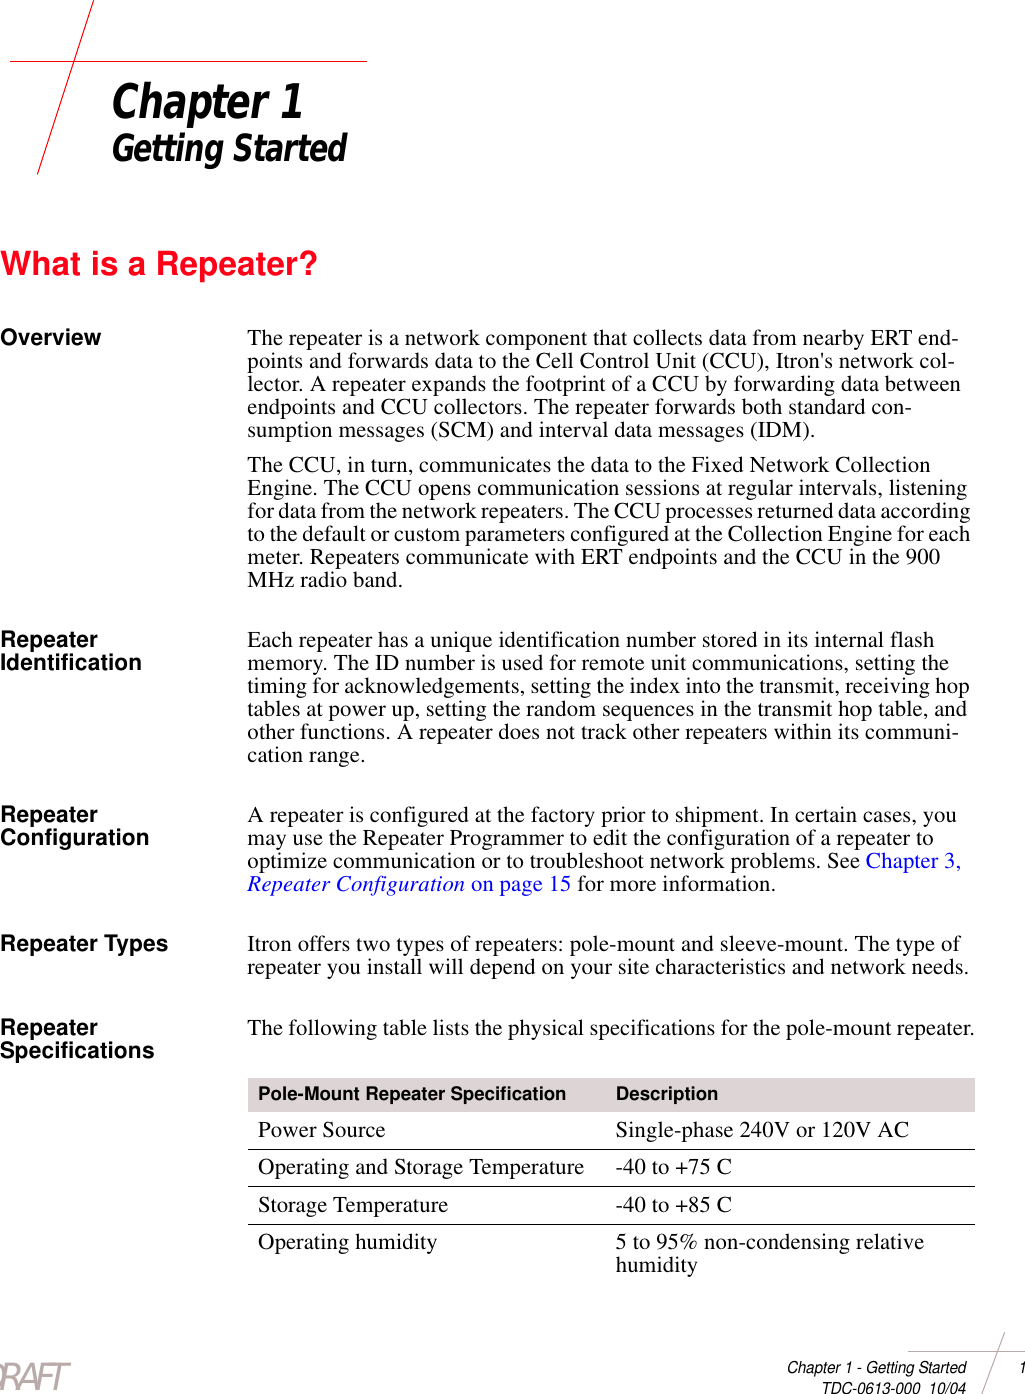 DRAFTChapter 1 - Getting Started 1 TDC-0613-000  10/04Chapter 1Getting StartedWhat is a Repeater?Overview The repeater is a network component that collects data from nearby ERT end-points and forwards data to the Cell Control Unit (CCU), Itron&apos;s network col-lector. A repeater expands the footprint of a CCU by forwarding data between endpoints and CCU collectors. The repeater forwards both standard con-sumption messages (SCM) and interval data messages (IDM).The CCU, in turn, communicates the data to the Fixed Network Collection Engine. The CCU opens communication sessions at regular intervals, listening for data from the network repeaters. The CCU processes returned data according to the default or custom parameters configured at the Collection Engine for each meter. Repeaters communicate with ERT endpoints and the CCU in the 900 MHz radio band. Repeater Identification Each repeater has a unique identification number stored in its internal flash memory. The ID number is used for remote unit communications, setting the timing for acknowledgements, setting the index into the transmit, receiving hop tables at power up, setting the random sequences in the transmit hop table, and other functions. A repeater does not track other repeaters within its communi-cation range.Repeater Configuration A repeater is configured at the factory prior to shipment. In certain cases, you may use the Repeater Programmer to edit the configuration of a repeater to optimize communication or to troubleshoot network problems. See Chapter 3, Repeater Configuration on page 15 for more information.Repeater Types Itron offers two types of repeaters: pole-mount and sleeve-mount. The type of repeater you install will depend on your site characteristics and network needs.Repeater Specifications The following table lists the physical specifications for the pole-mount repeater.Pole-Mount Repeater Specification DescriptionPower Source Single-phase 240V or 120V ACOperating and Storage Temperature -40 to +75 C Storage Temperature -40 to +85 C Operating humidity 5 to 95% non-condensing relative humidity